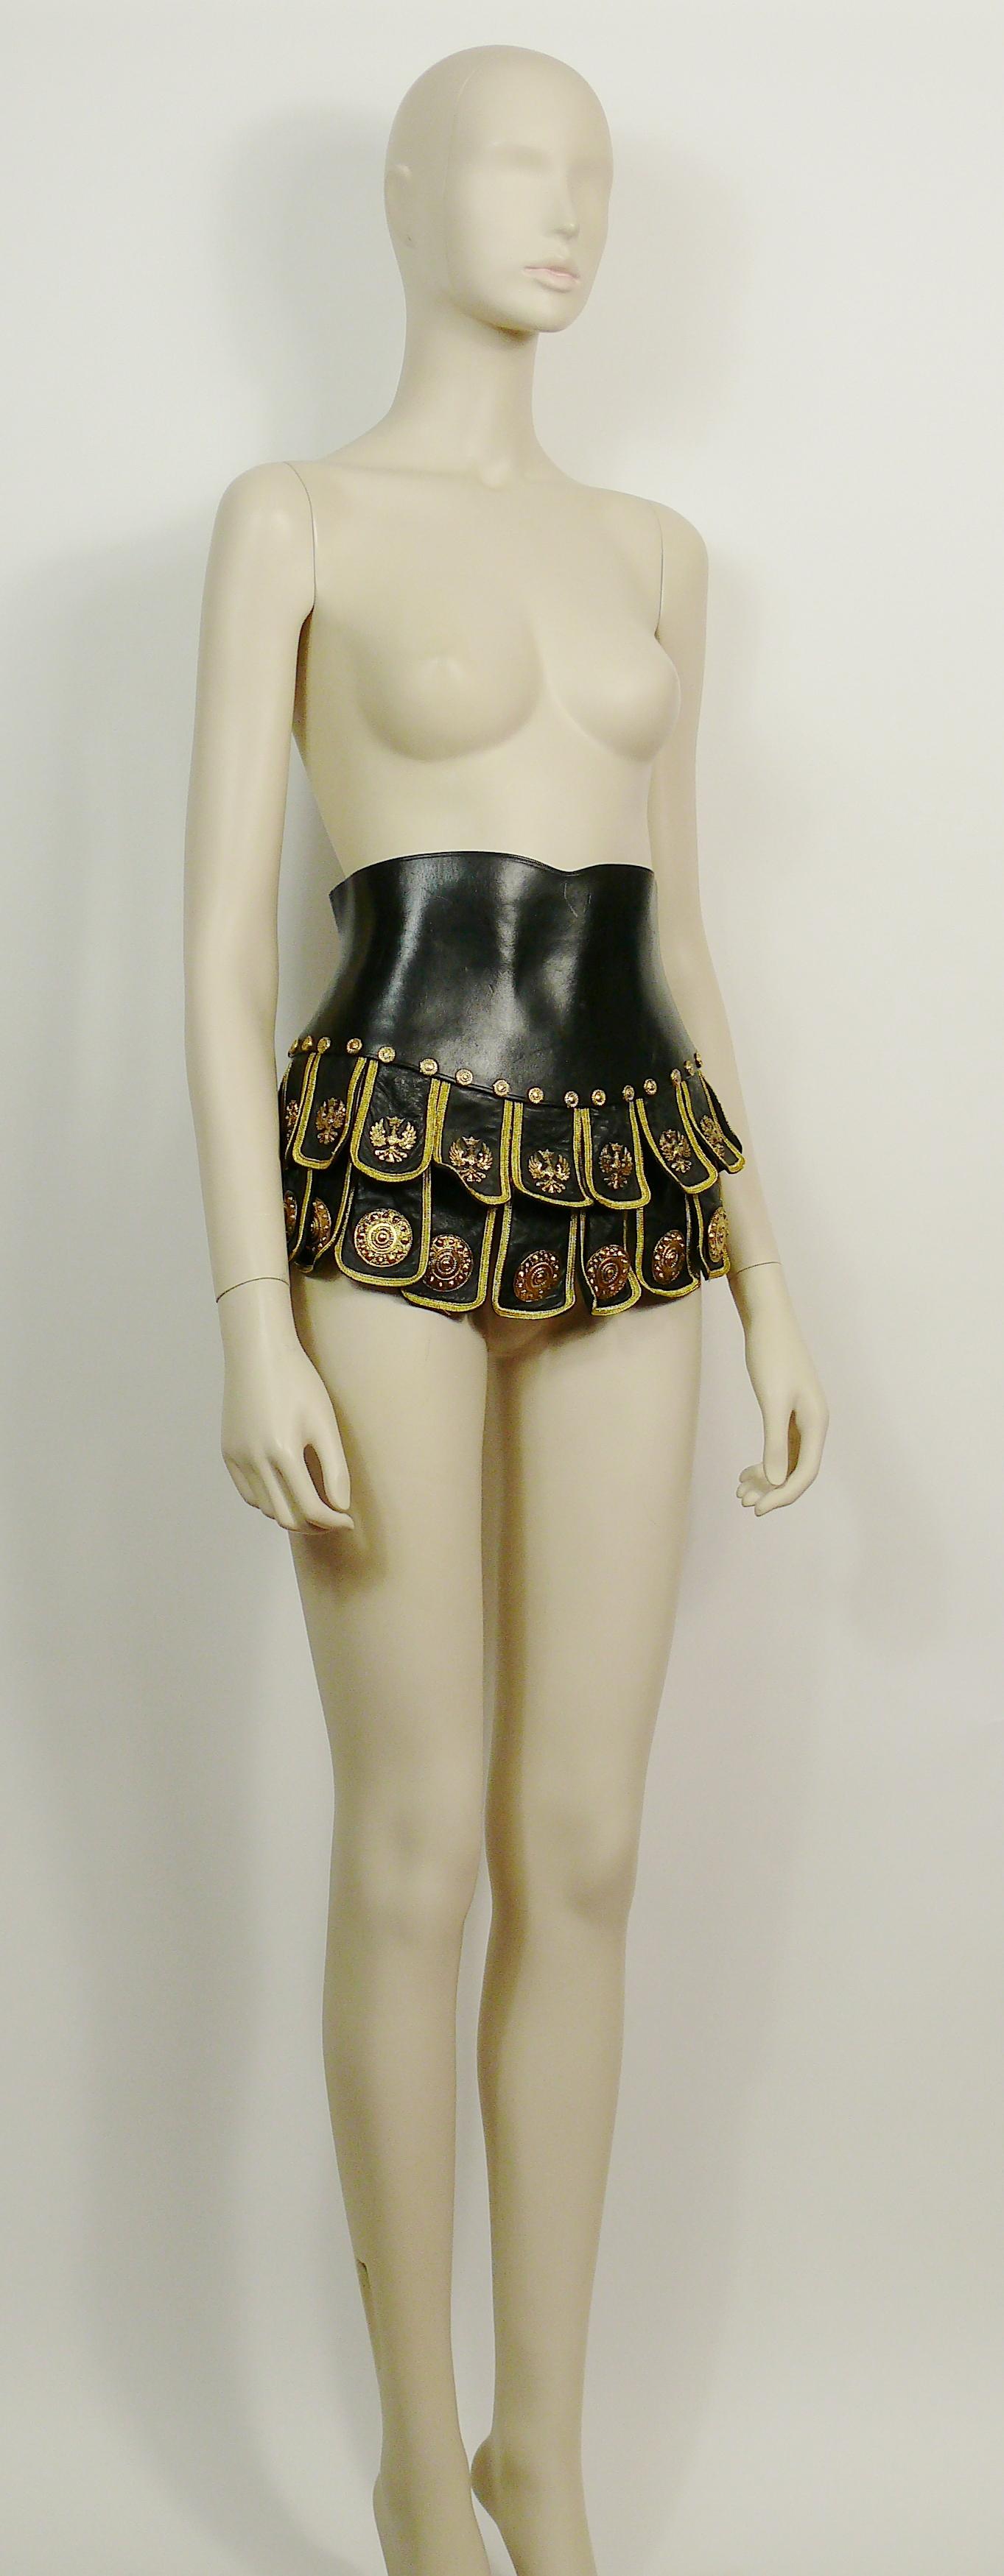 MOSCHINO vintage rare black Roman Centurion soldier corset belt.

This belt features :
- Black leather with gold toned hardware.
- Eagle and shield metal plaques.
- Round embossed studs
- Double layer of scalloped flaps with gold trim.
- Concealed